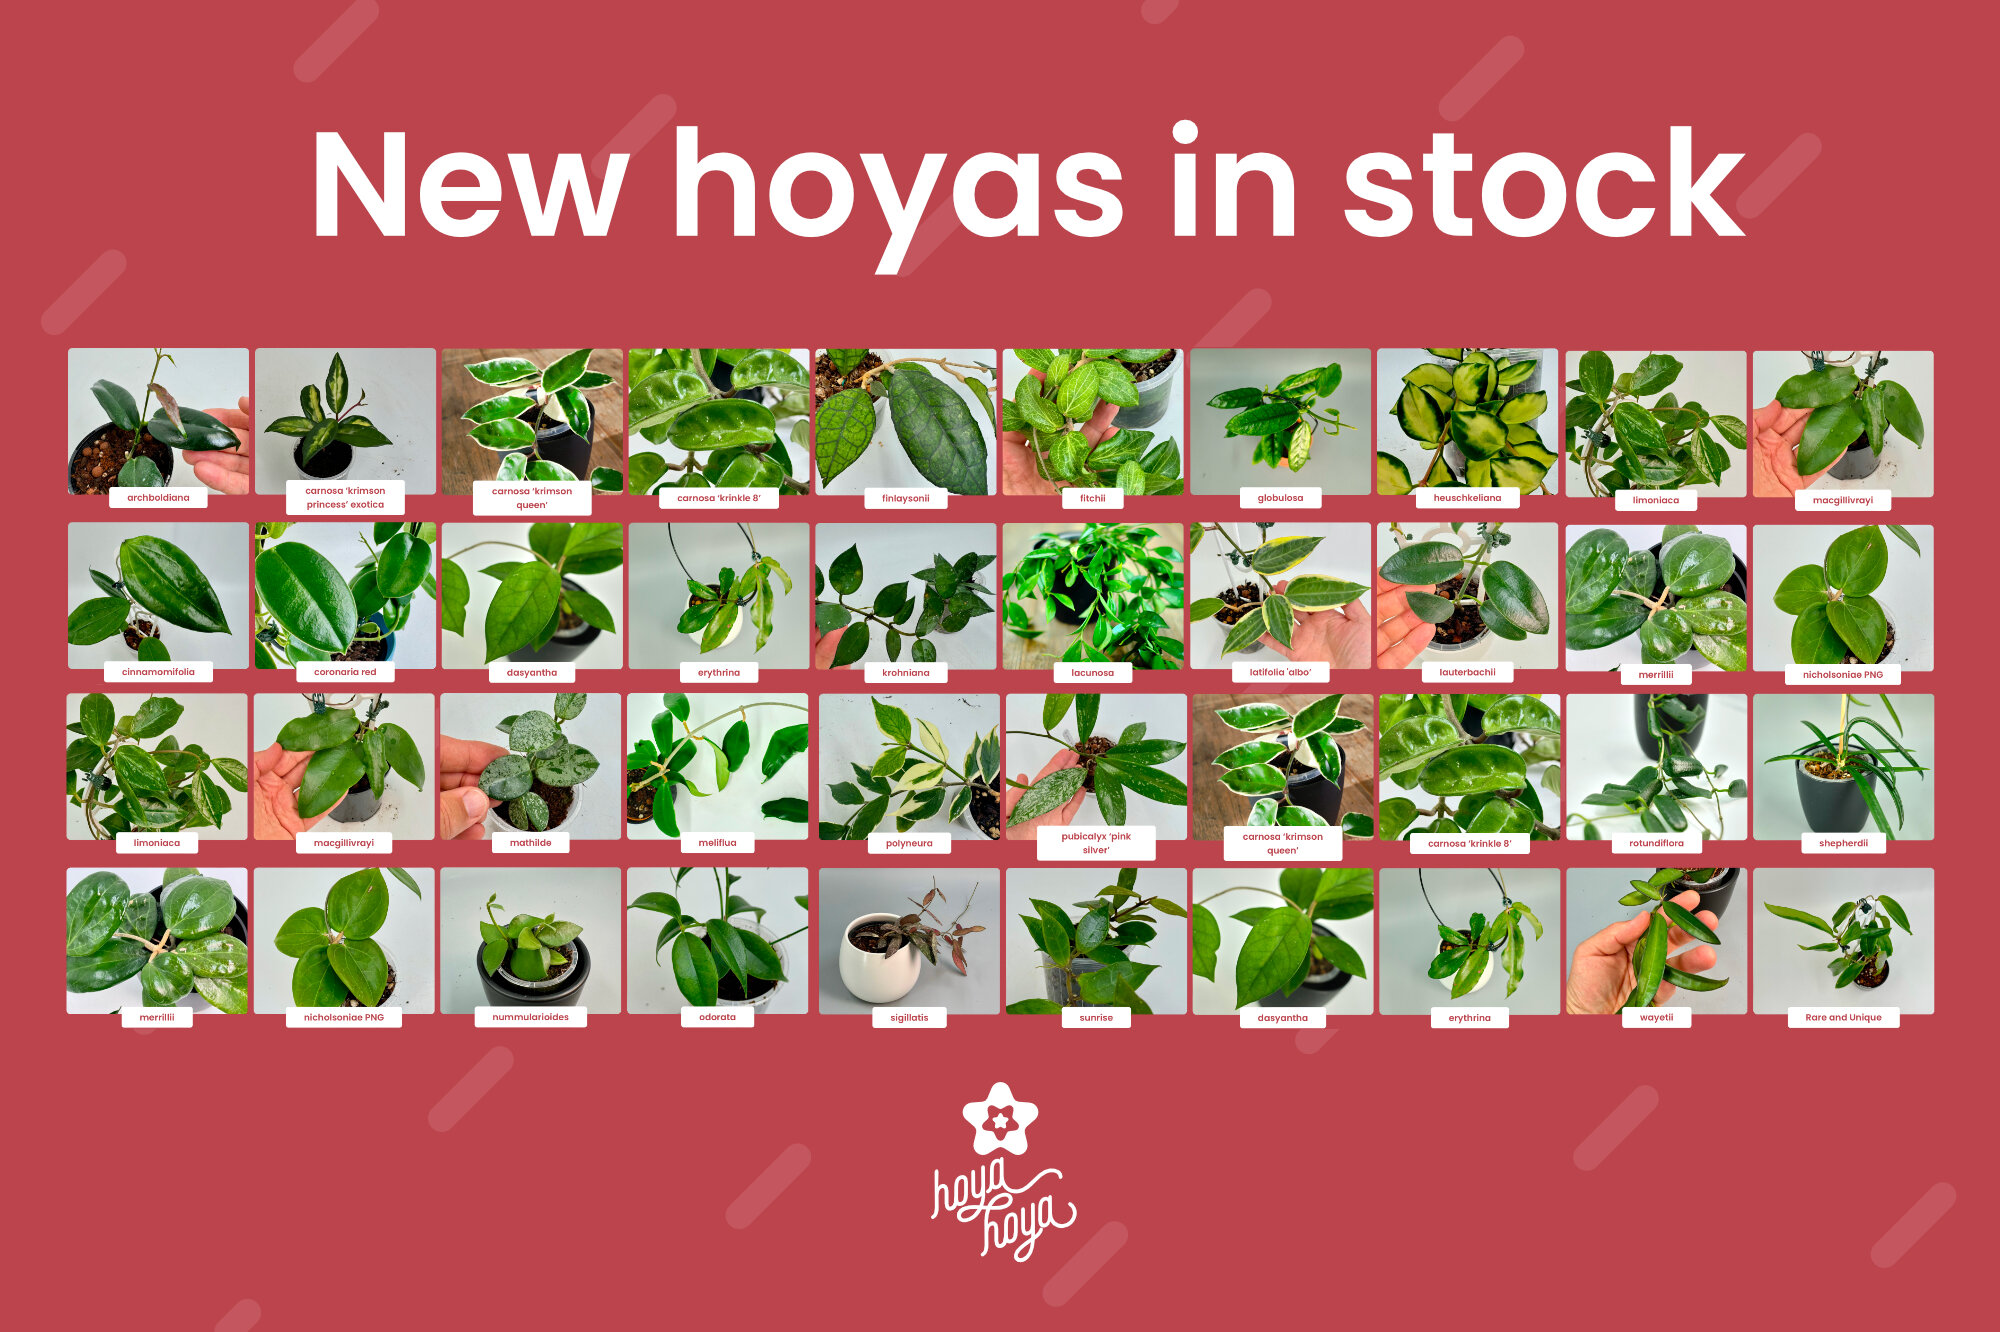 Hello hoya lovers!

It's been a fantastic summer in the nursery. We've seen dozens, if not hundreds, of blooms over the new year - the smell of the nursery is a delight to walk into every day.

And we've been busy! We have loads of new hoyas in stock